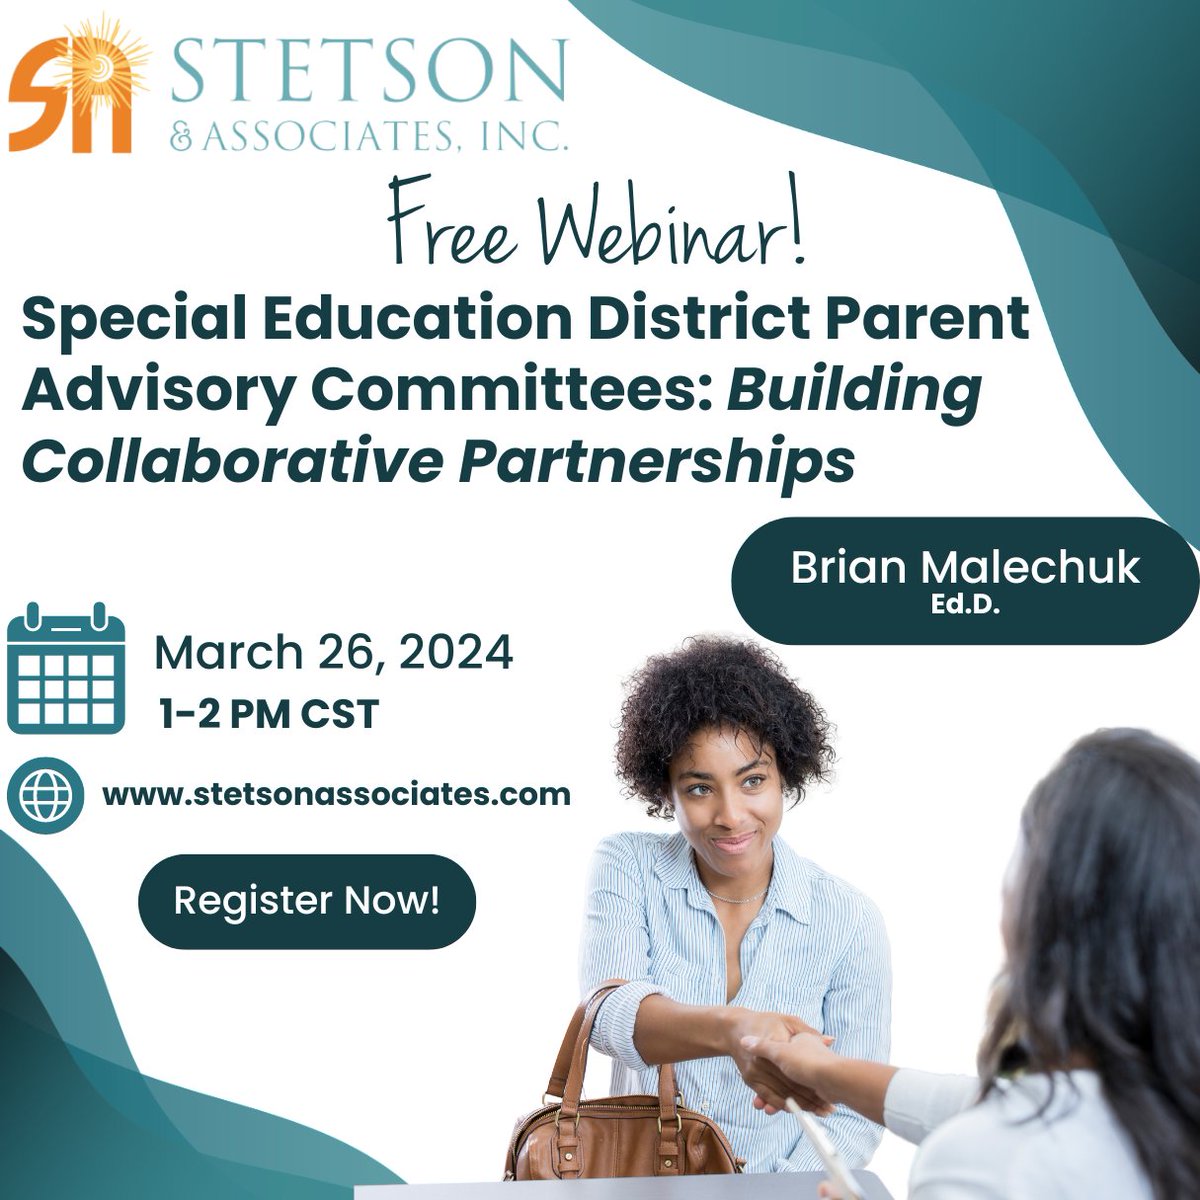 ✅ Only 5 days away... Sign up now! ✅ Don't miss our upcoming webinar on how to build collaborative partnerships through Special Education District Parent Advisory Committees. #SpecialEducation #Inclusiveschools✨🤝 Register today: us02web.zoom.us/webinar/regist…